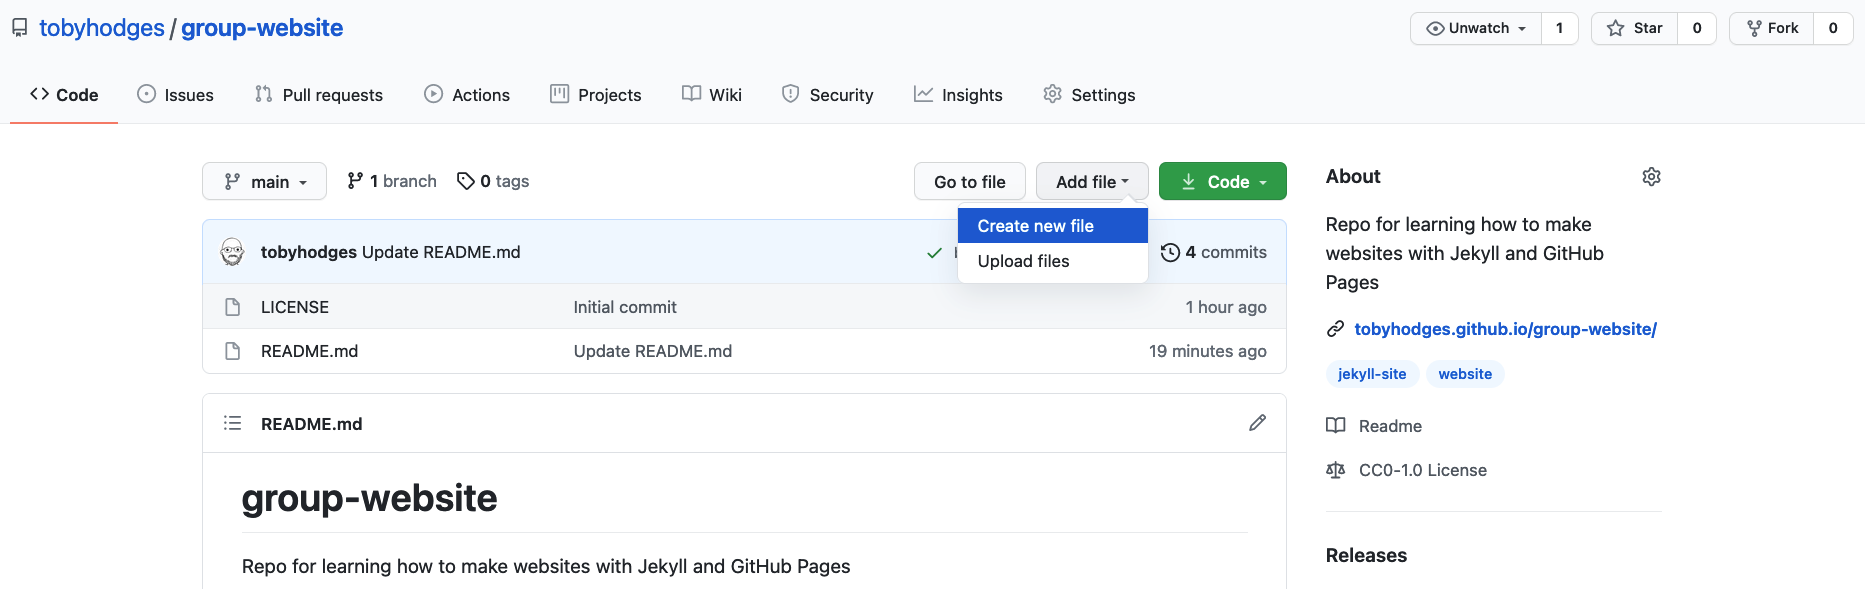 Create a new file button in the GitHub interface